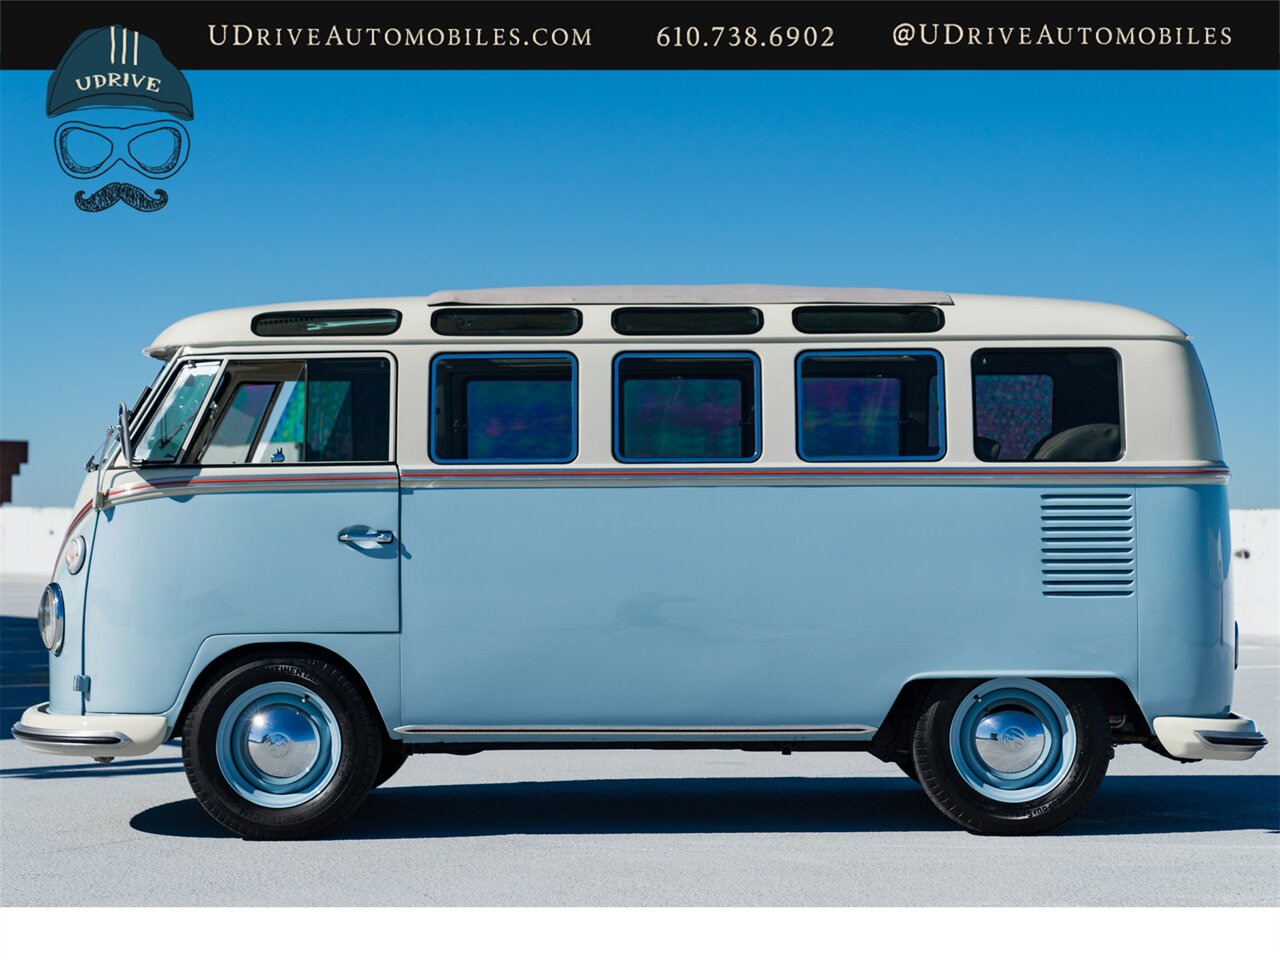 1965 Volkswagen Bus/Vanagon 21 Window Deluxe Transporter  Built By East Coast VW Restorations 1914cc A/C - Photo 10 - West Chester, PA 19382